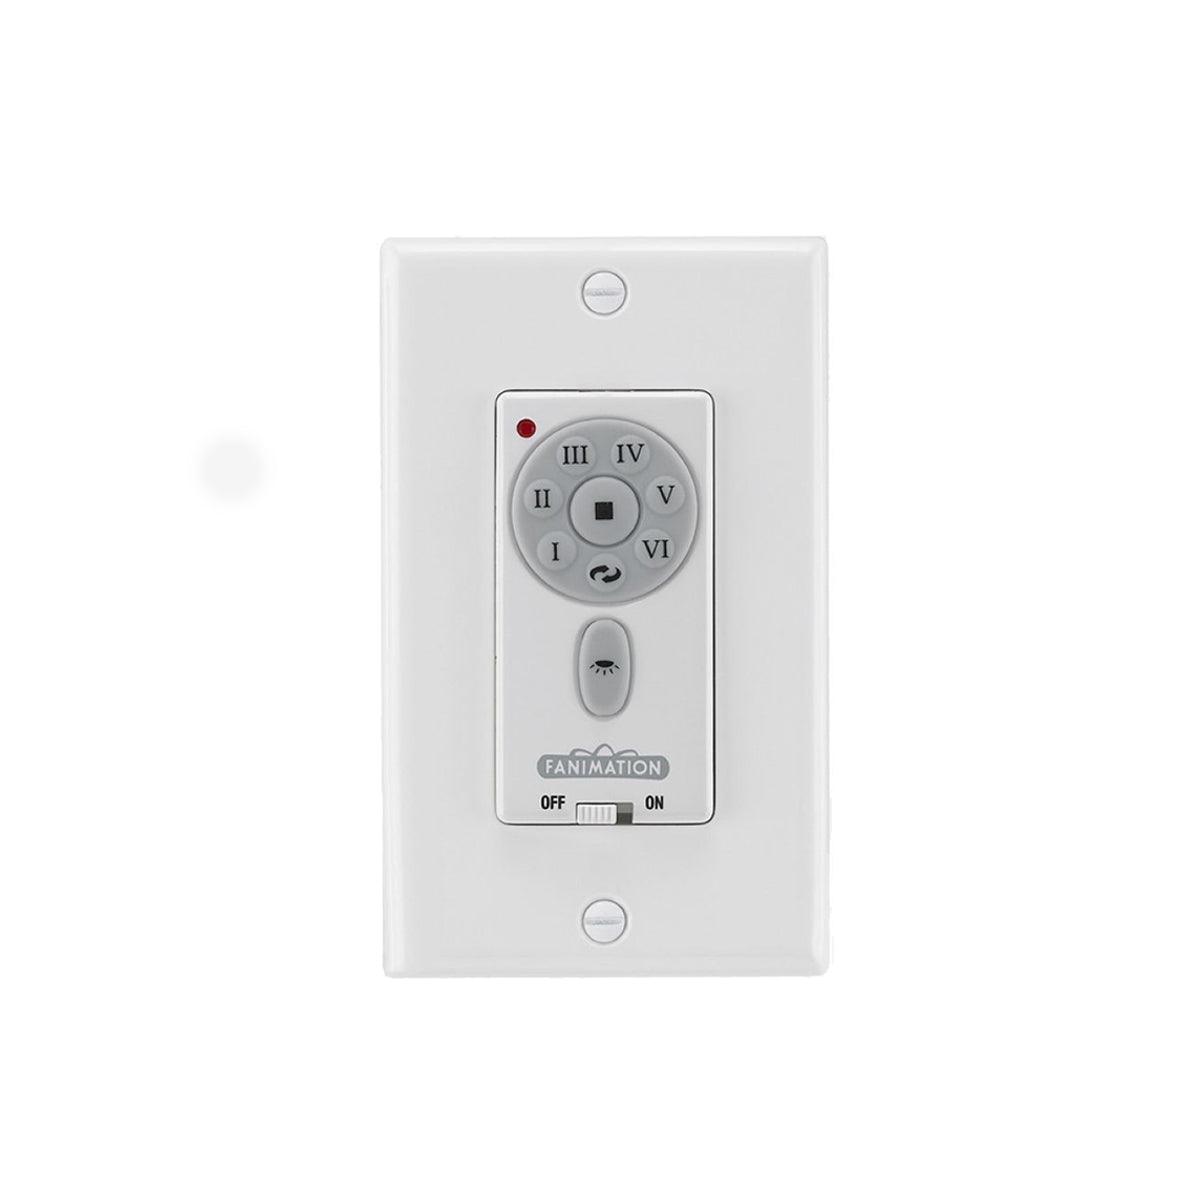 6-Speed DC Ceiling Fan And Light Wall Control, Reversing Switch, White Finish - Bees Lighting